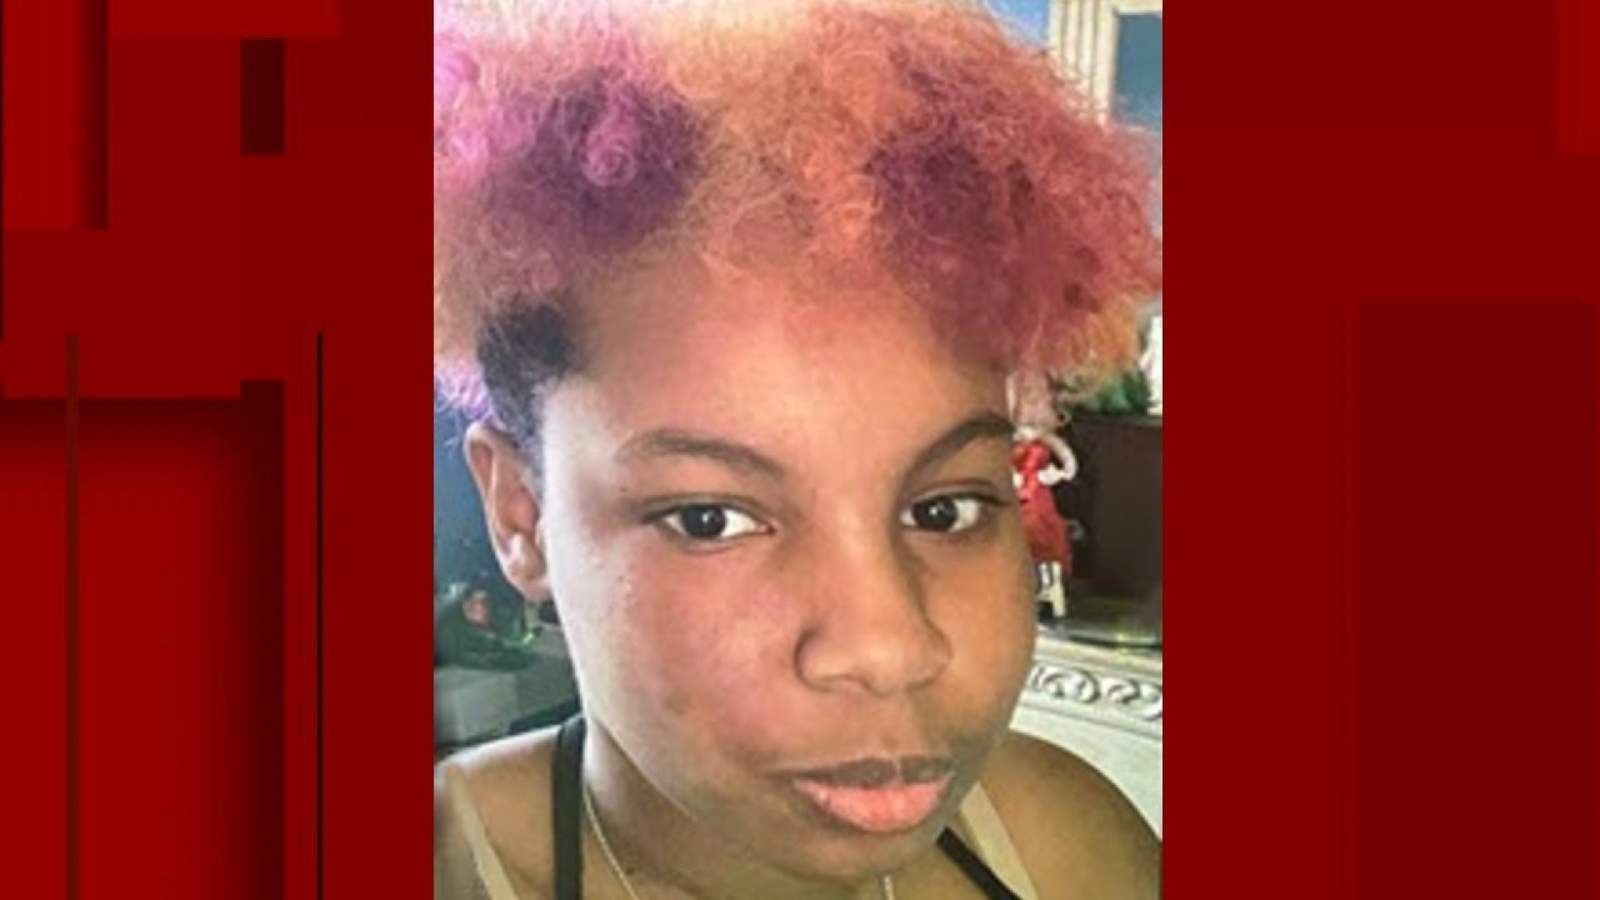 Missing child alert issued for 13-year-old Florida girl